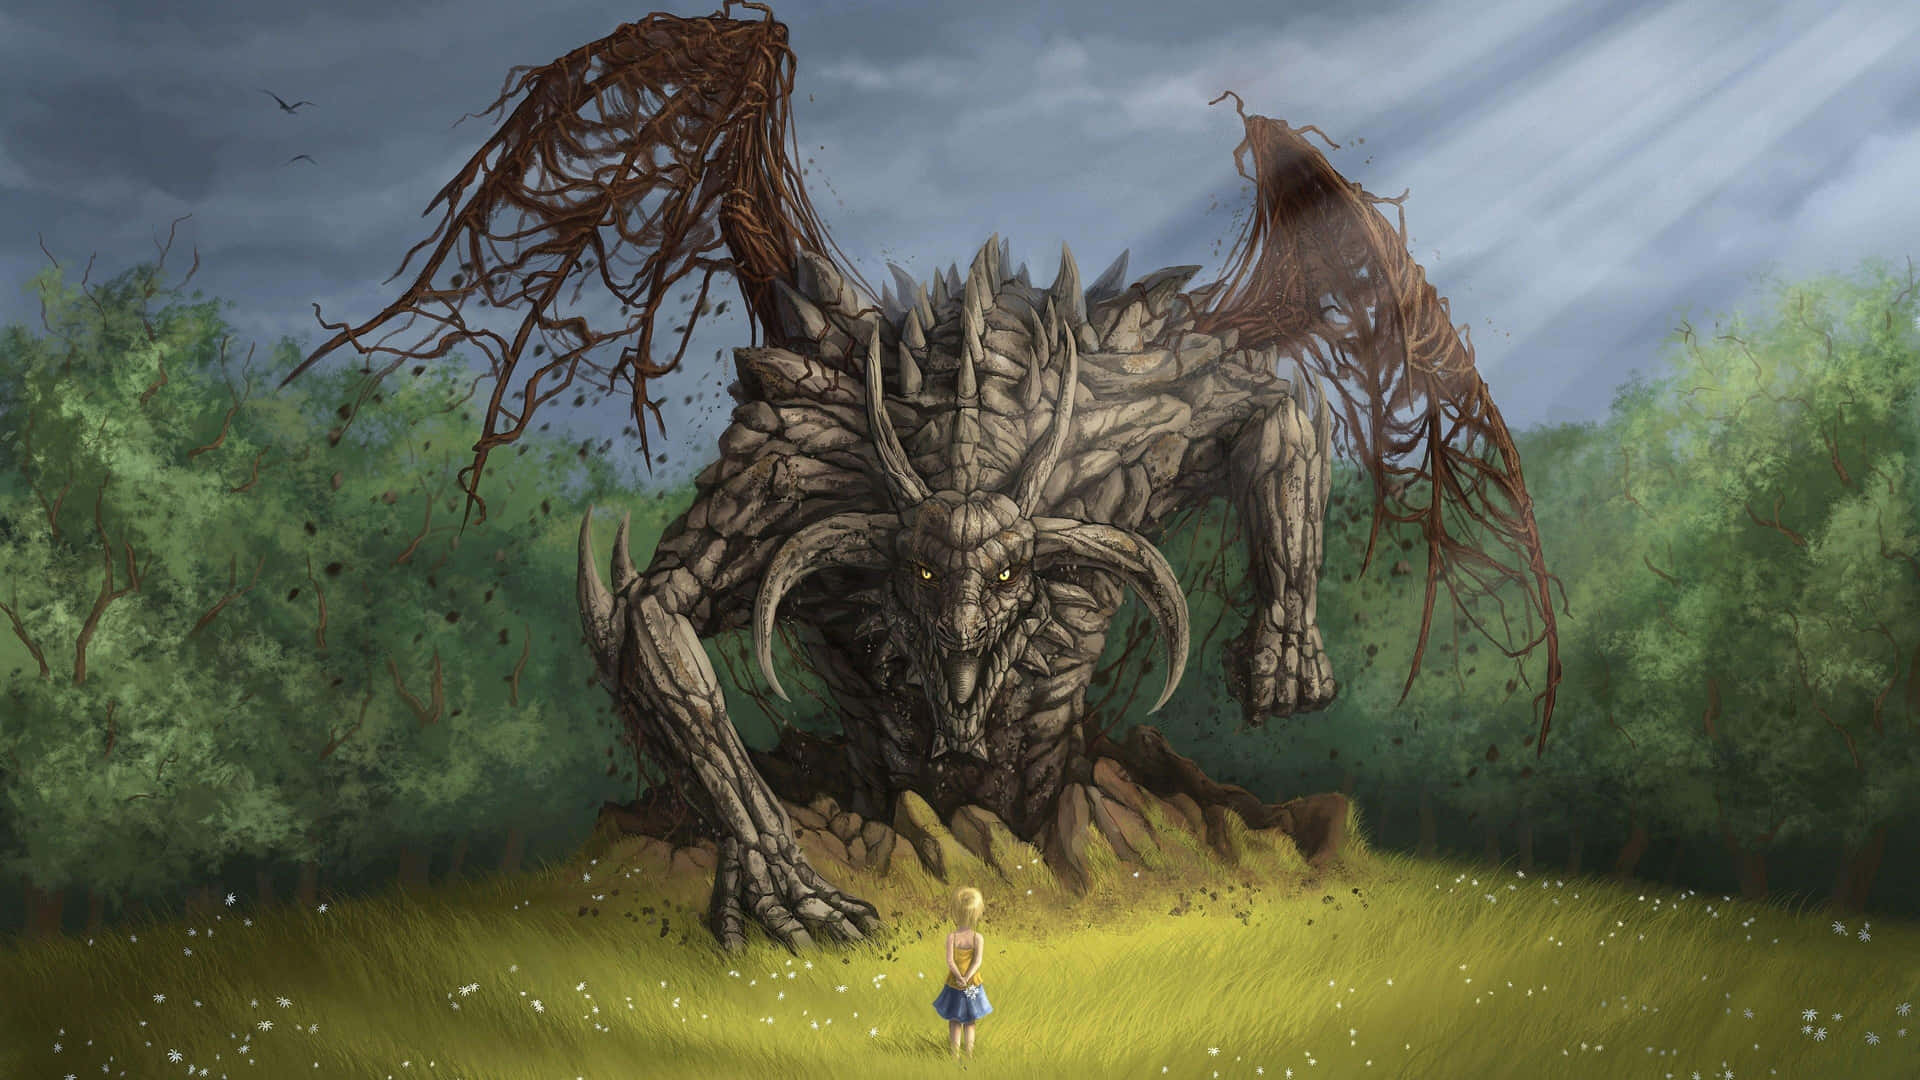 Little Girl And Scary Dragon Painting Wallpaper